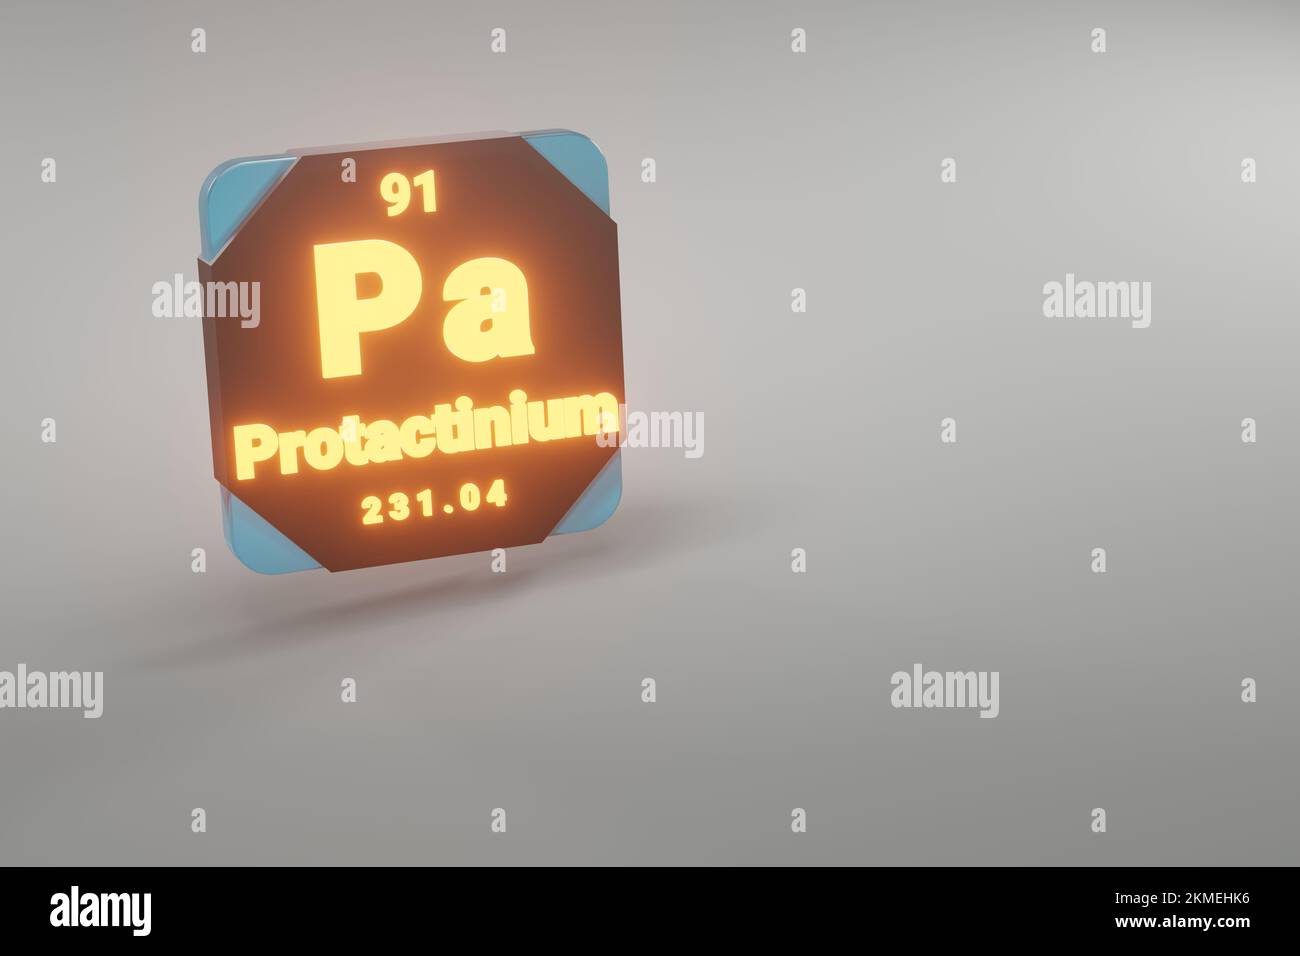 Beautiful abstract illustrations Standing black and fire Protactinium  element of the periodic table. Modern design with golden elements, 3d rendering Stock Photo